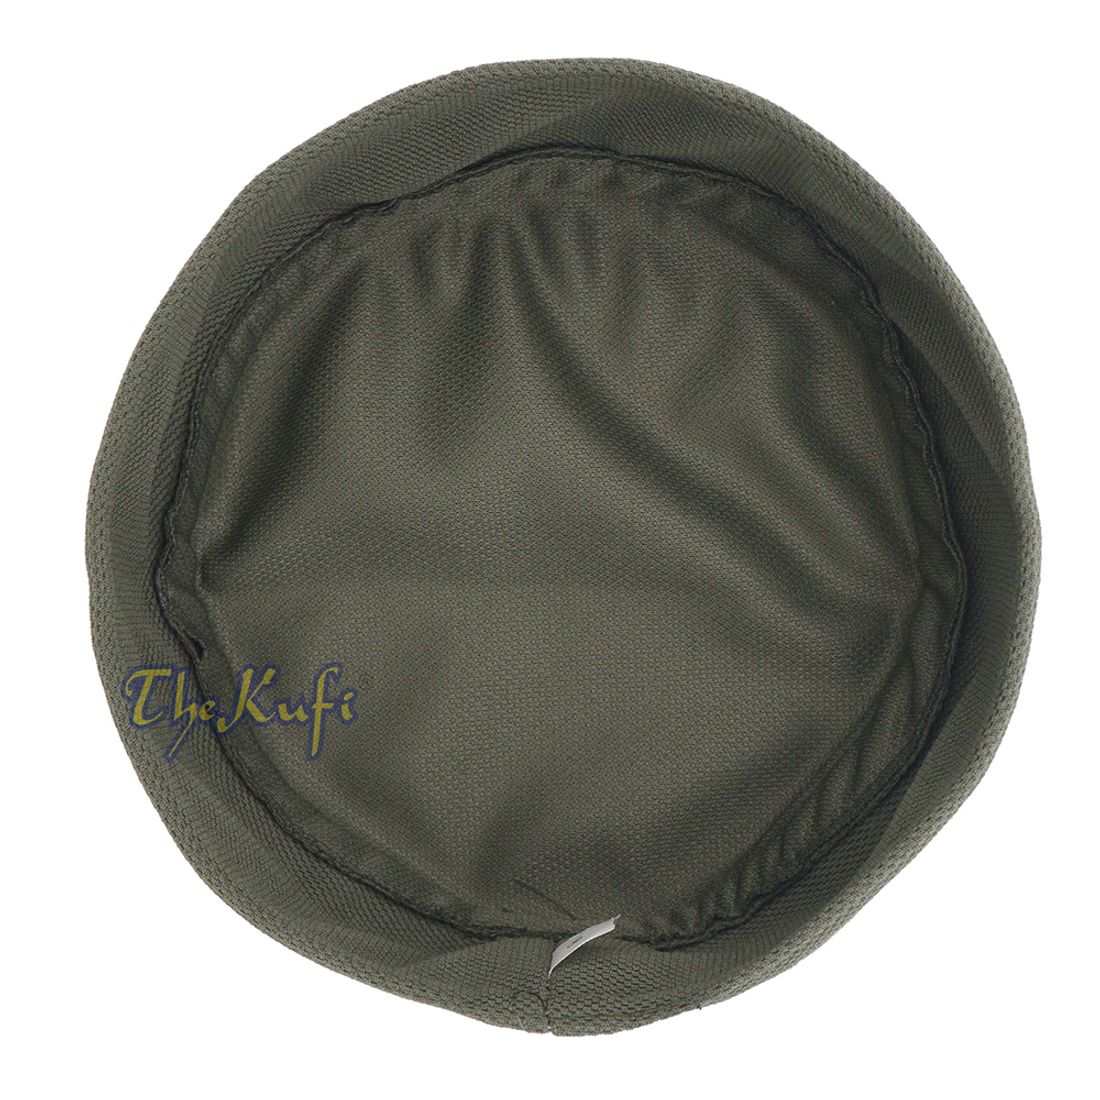 Army Green and Dark Green Madun Vented Top Pliable Two-color Round Kufi Hat